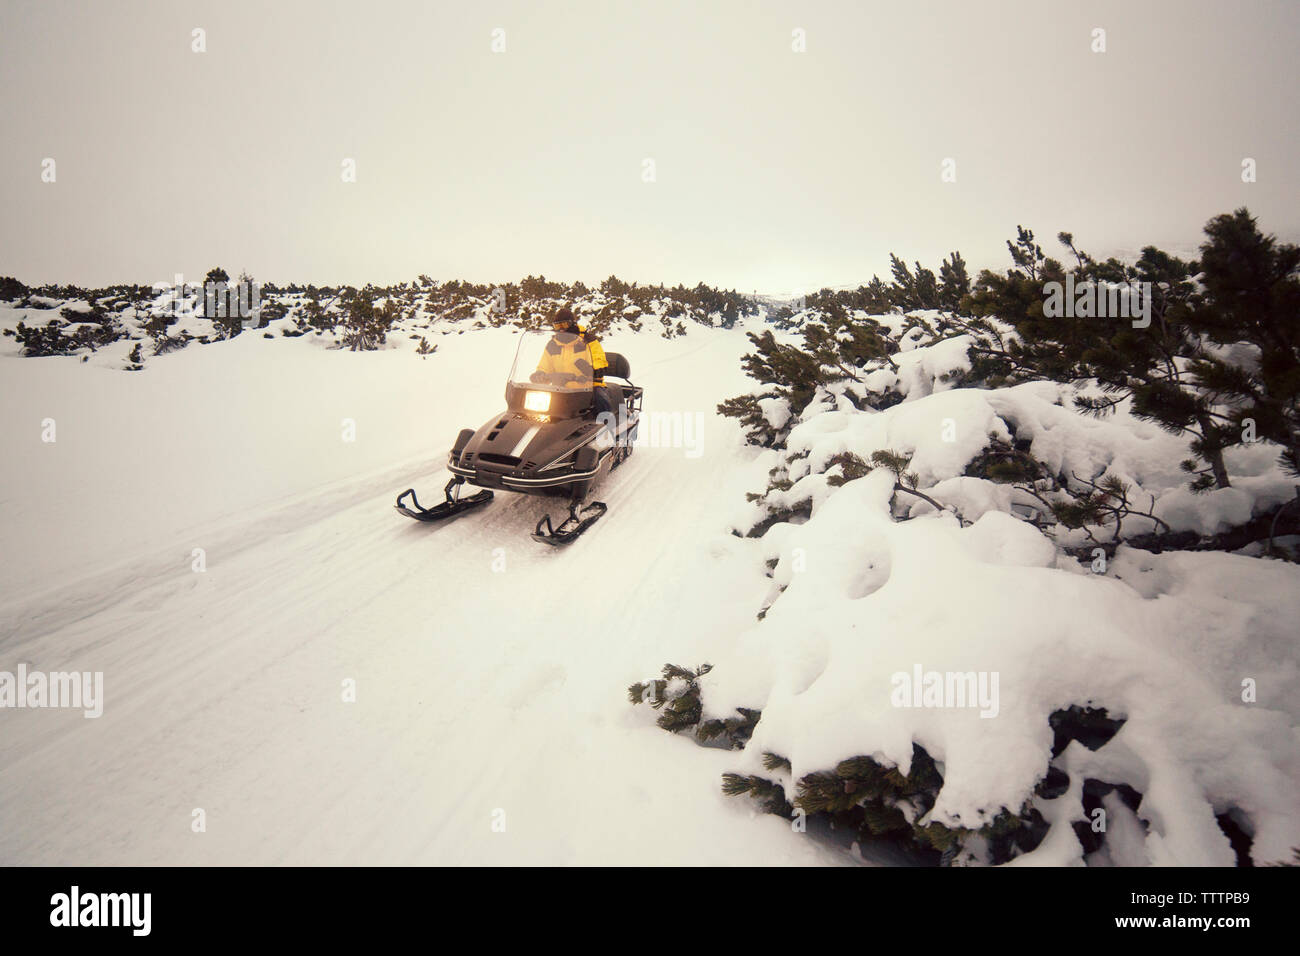 Man driving snowmobile on snowy field against sky Stock Photo